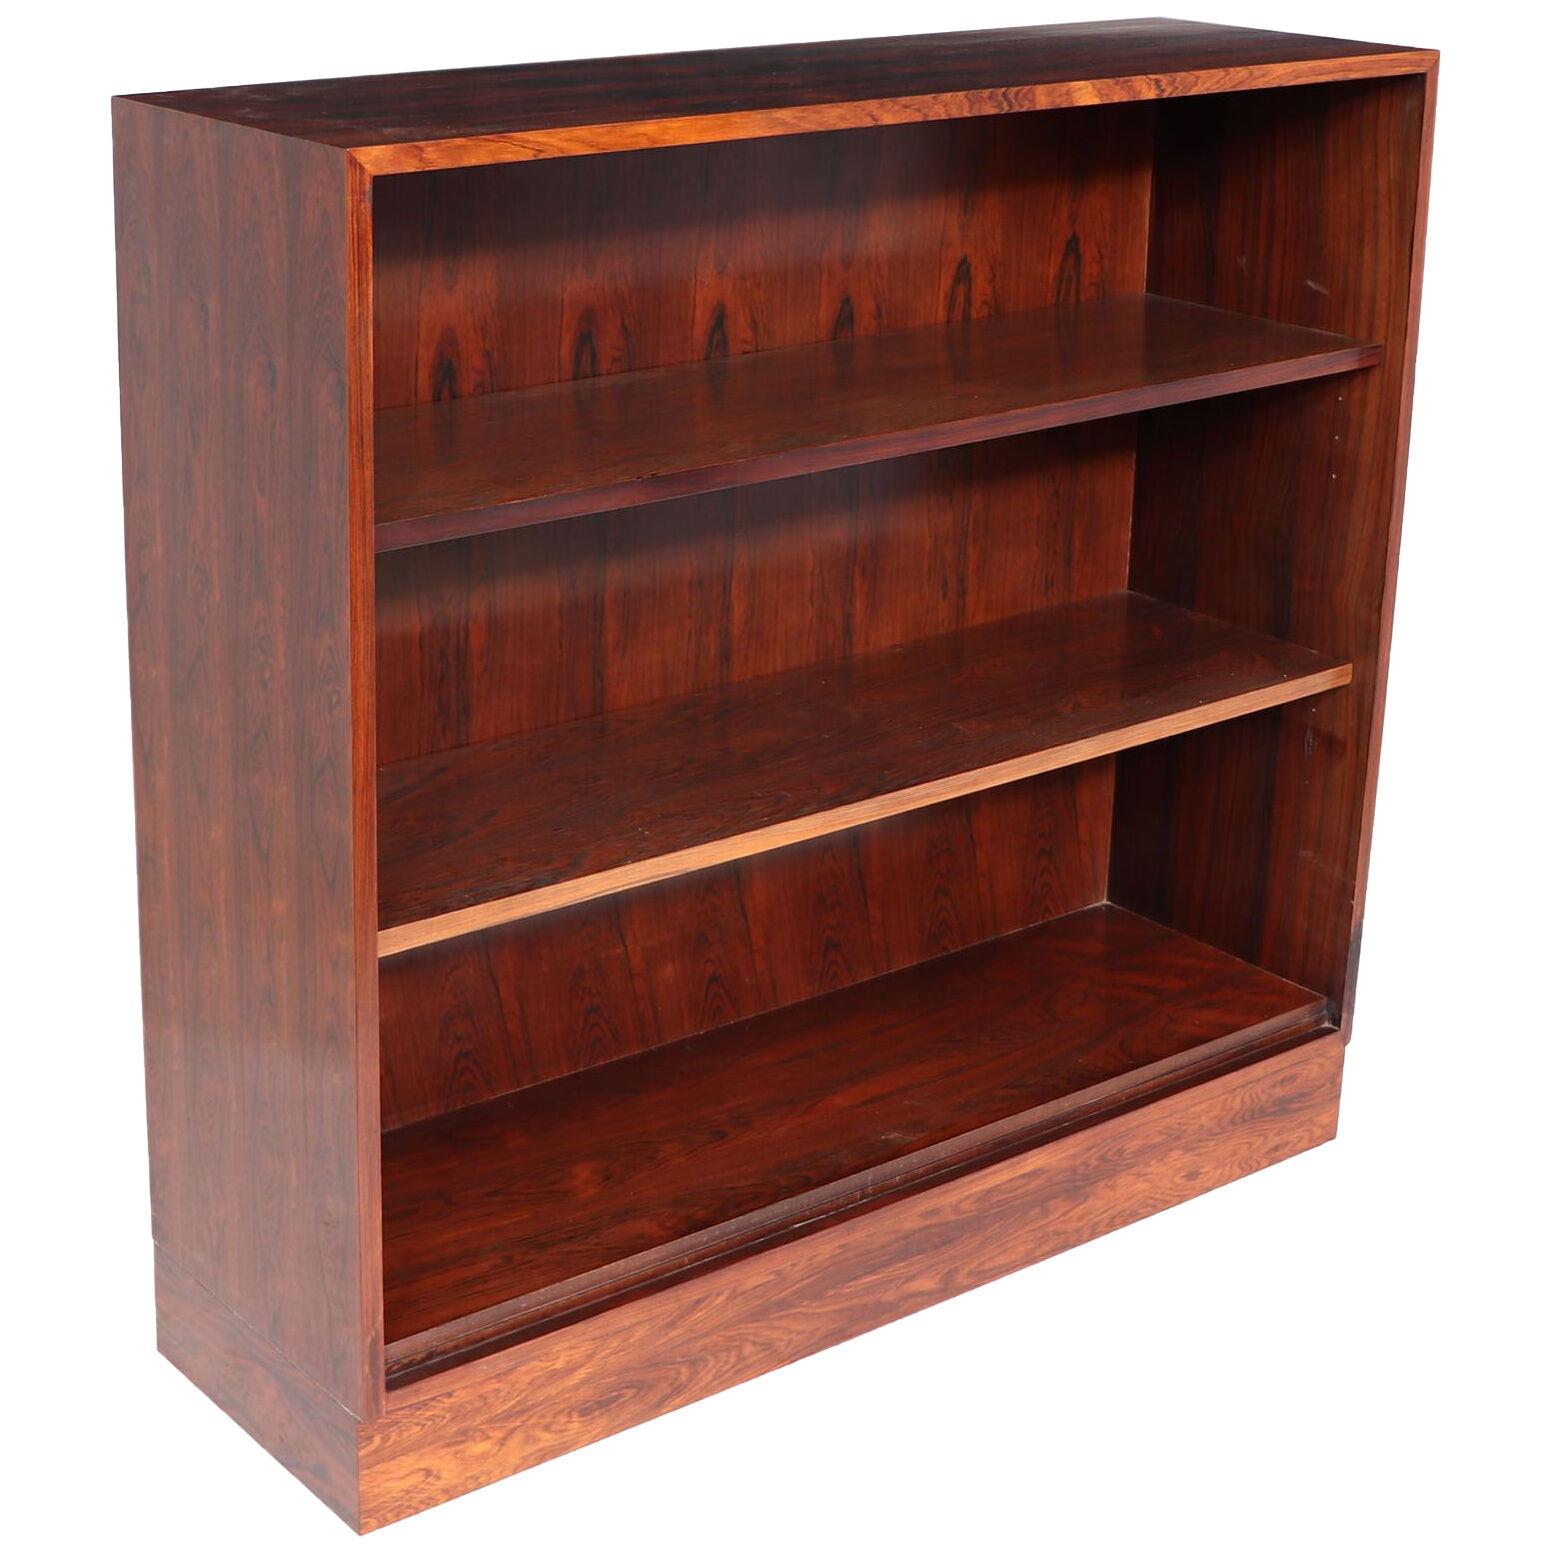 MID CENTURY OPEN BOOKCASE BY GORDON RUSSELL